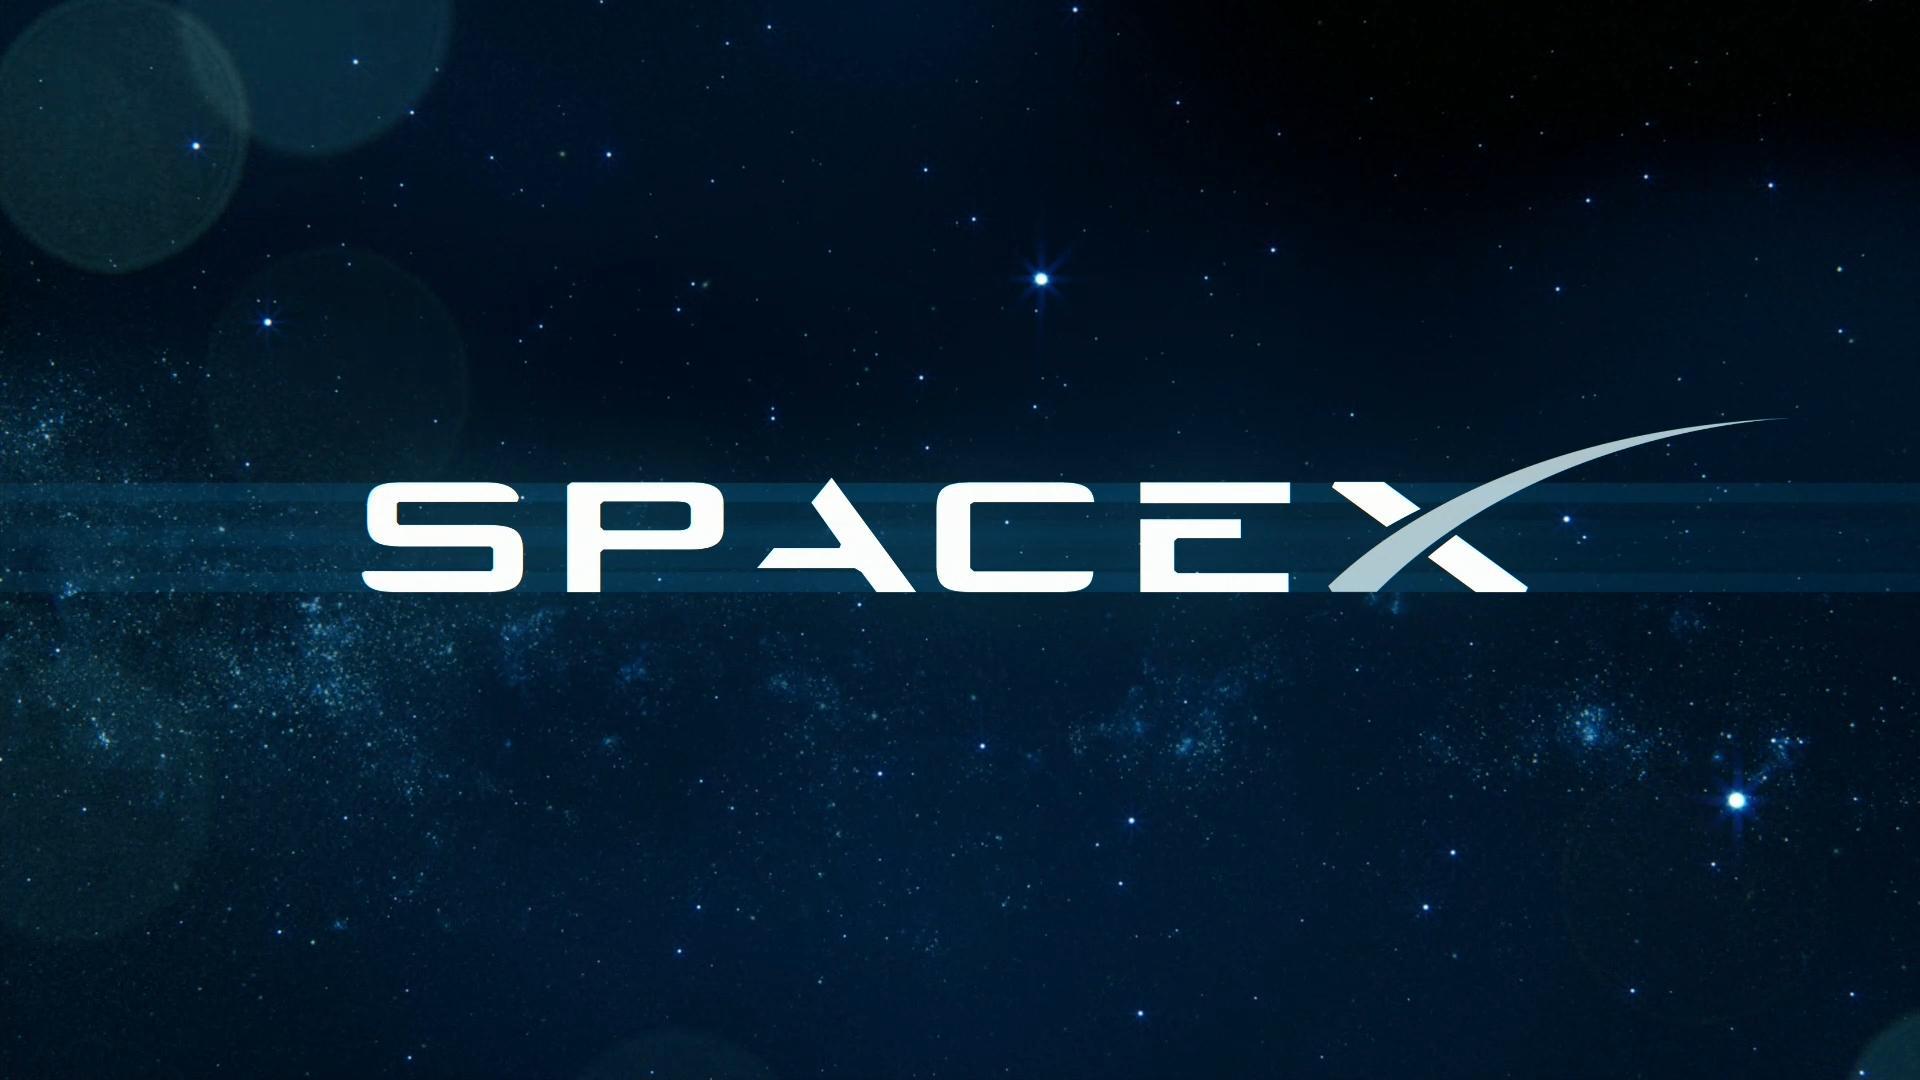 Spacex Wallpaper Image Photos Pictures Background